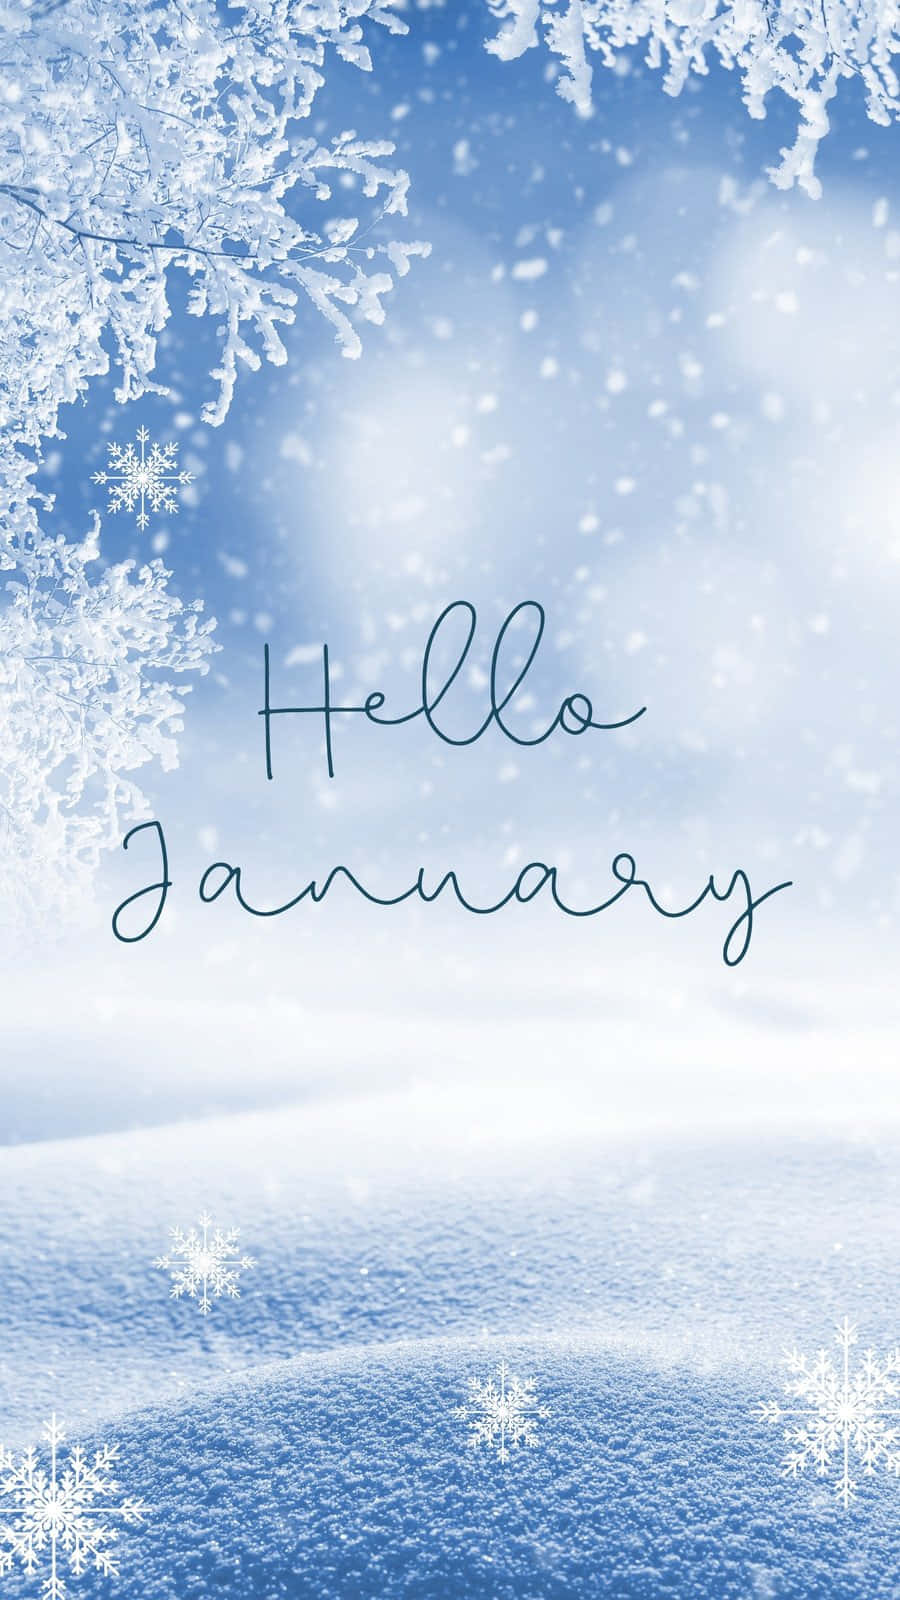 Hello January, greet the New Year with a smile! Wallpaper